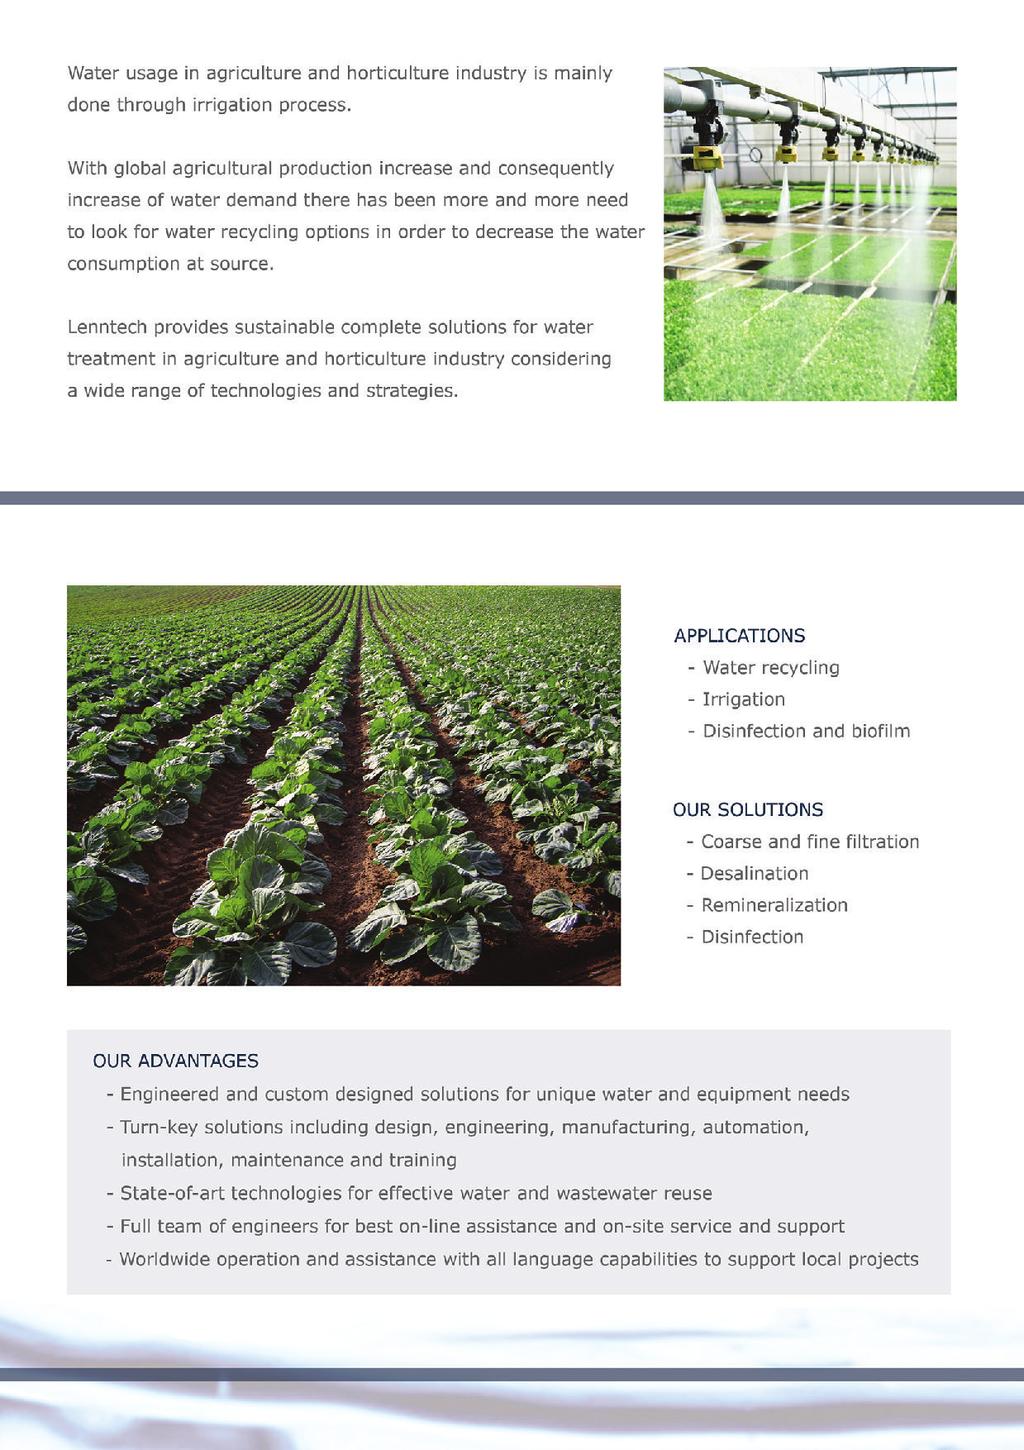 Water usage in agriculture and horticulture industry is mainly done through irrigation process.